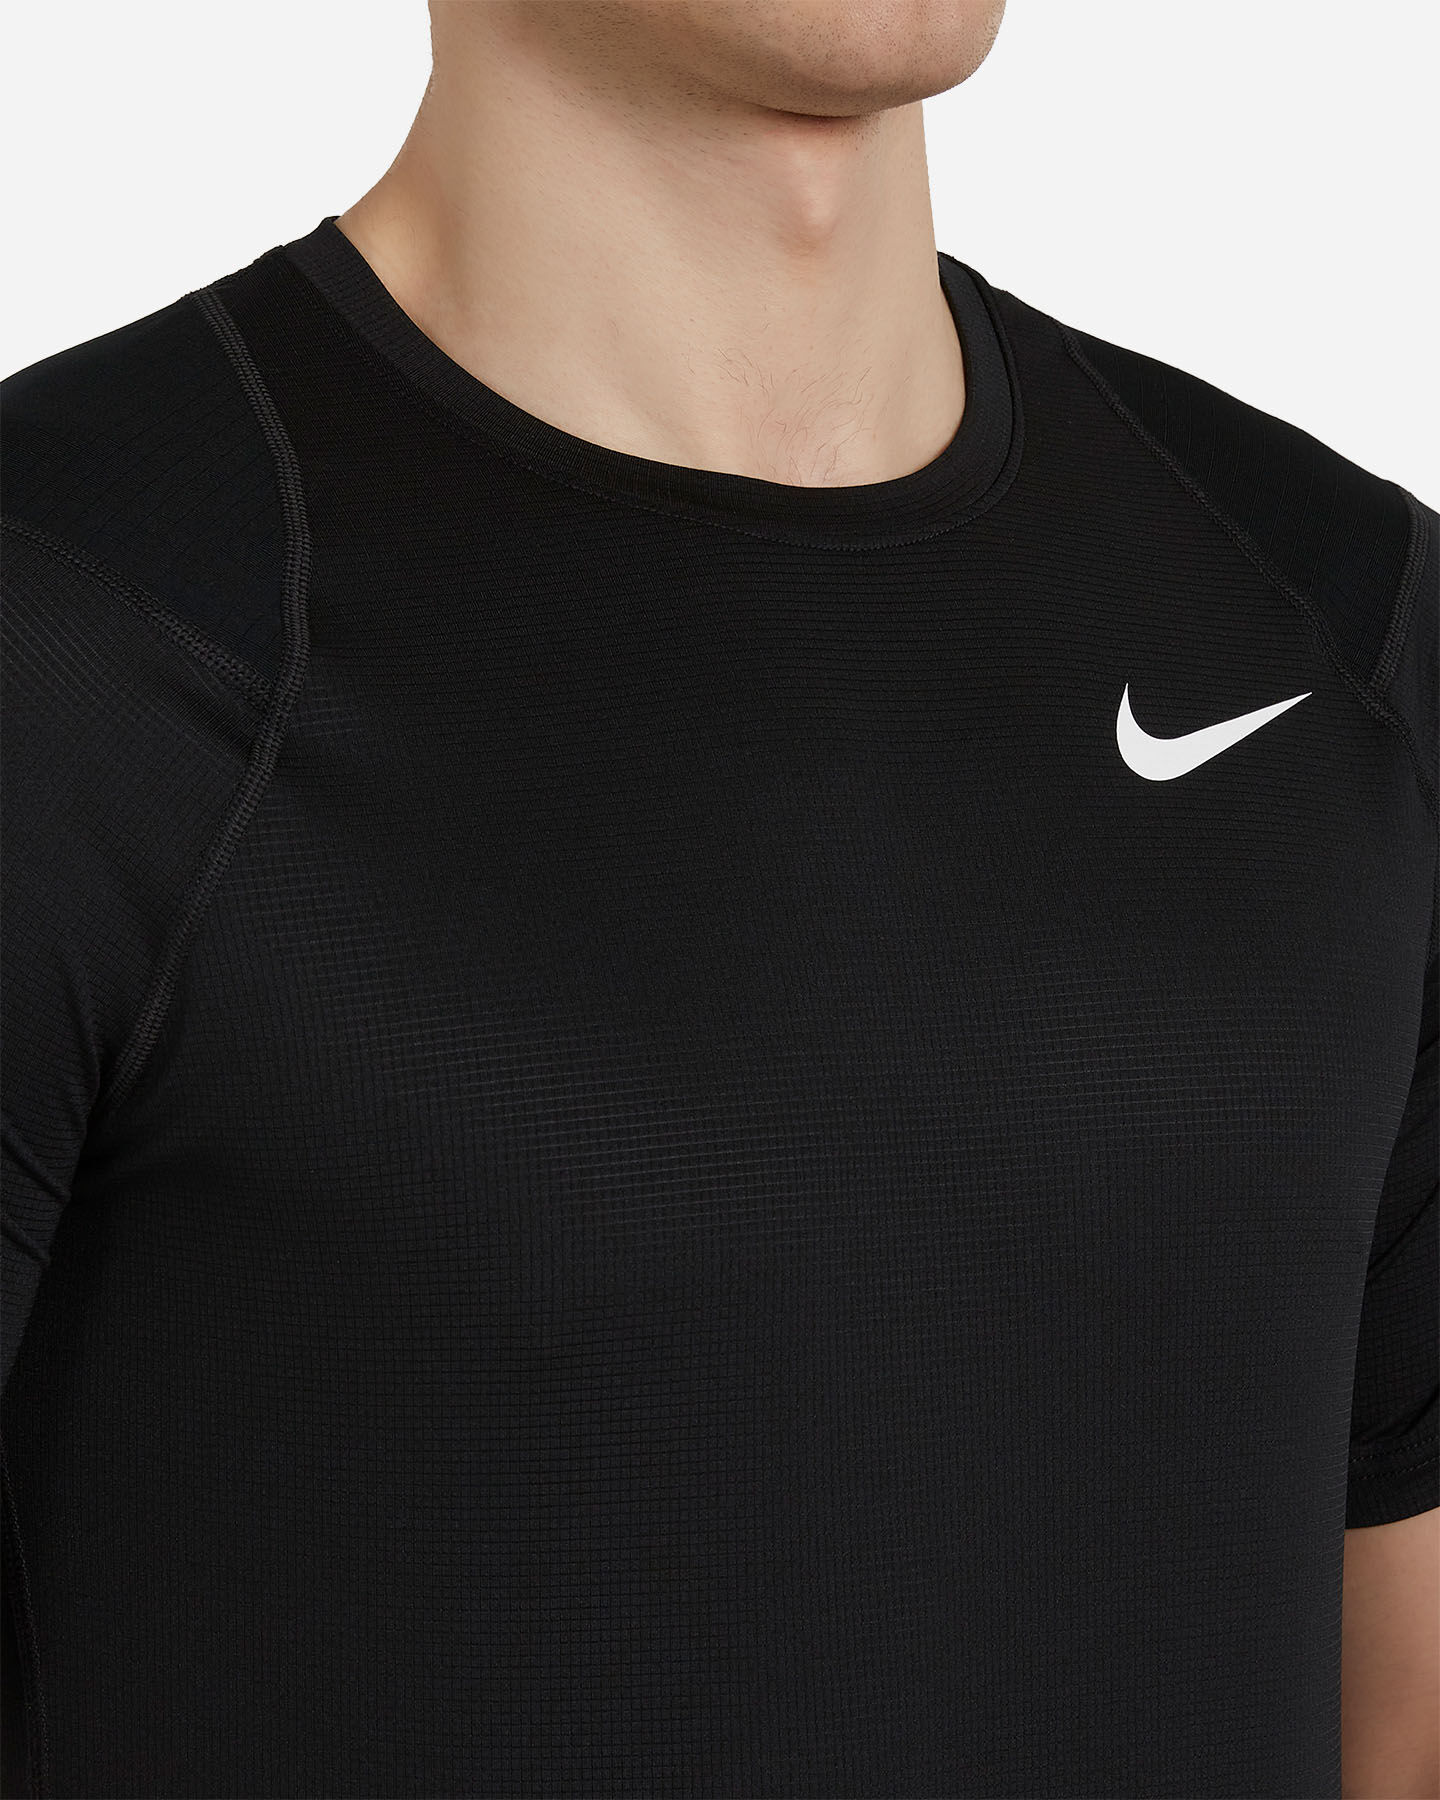  T-Shirt training NIKE PRO HBR M S5164348|010|S scatto 4